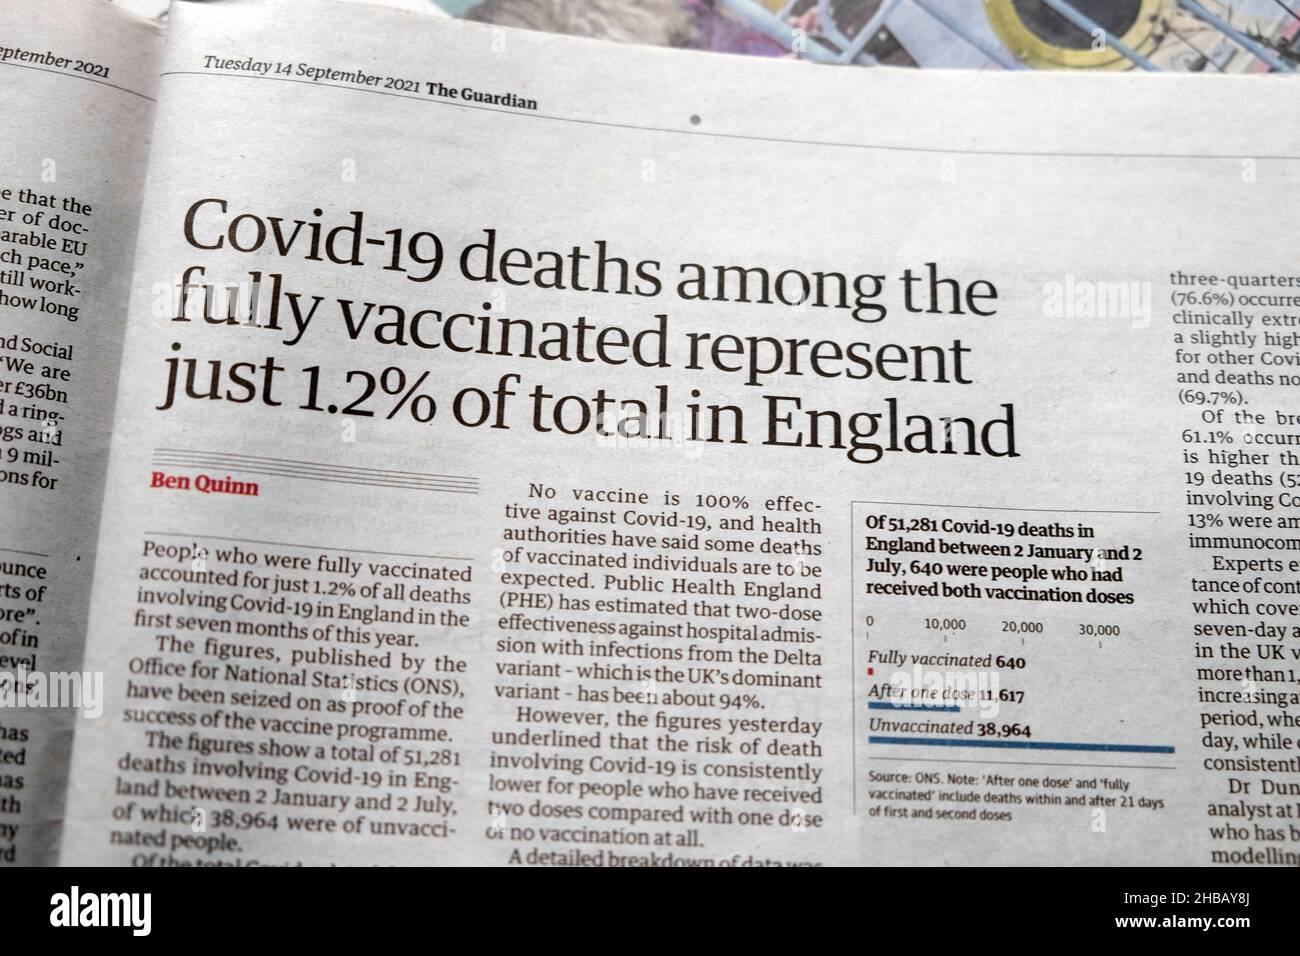 'Covid-19 deaths among the fully vaccinated represent just 1.2% of total in England' Guardian newspaper headline article 14 September 2021   London UK Stock Photo